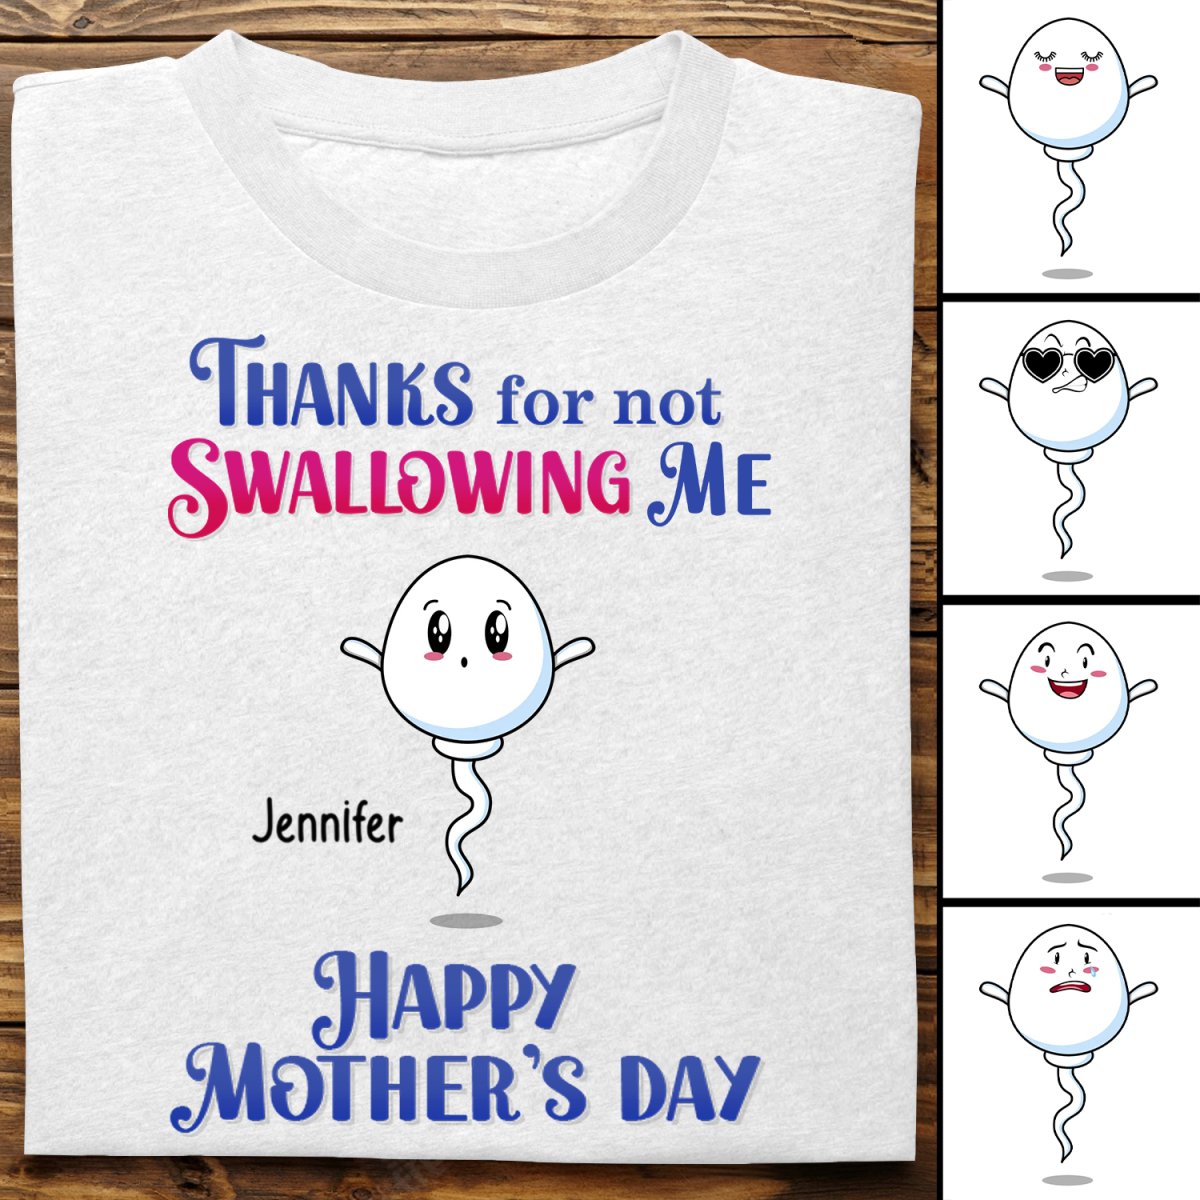 Discover Mother - Happy Mother's Day - Personalized Unisex T-shirt